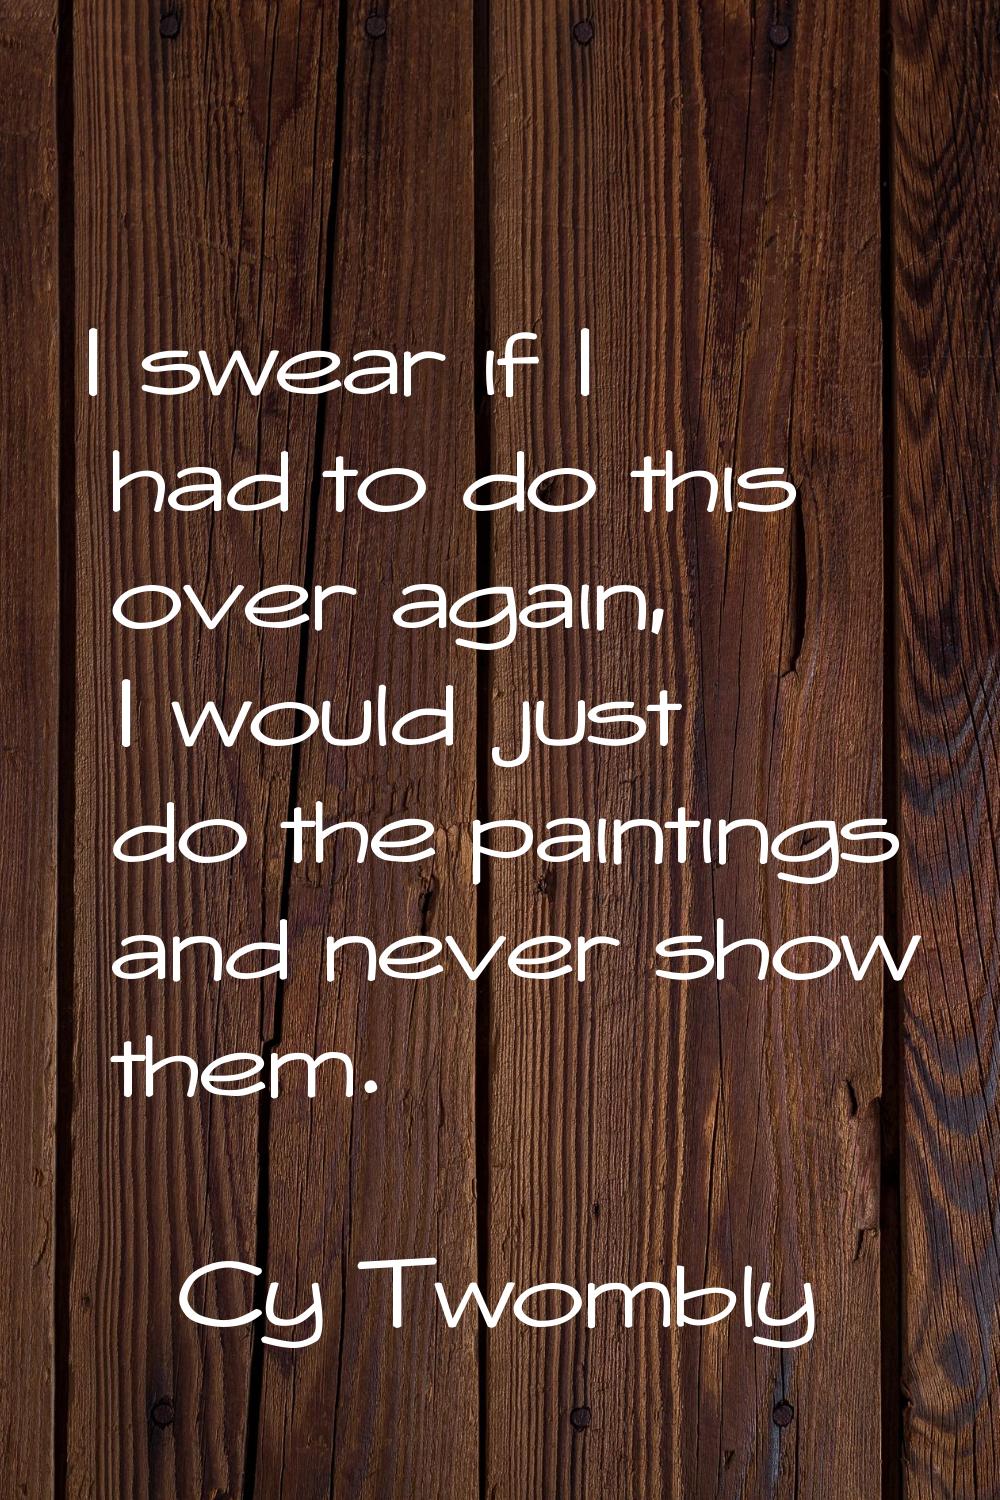 I swear if I had to do this over again, I would just do the paintings and never show them.